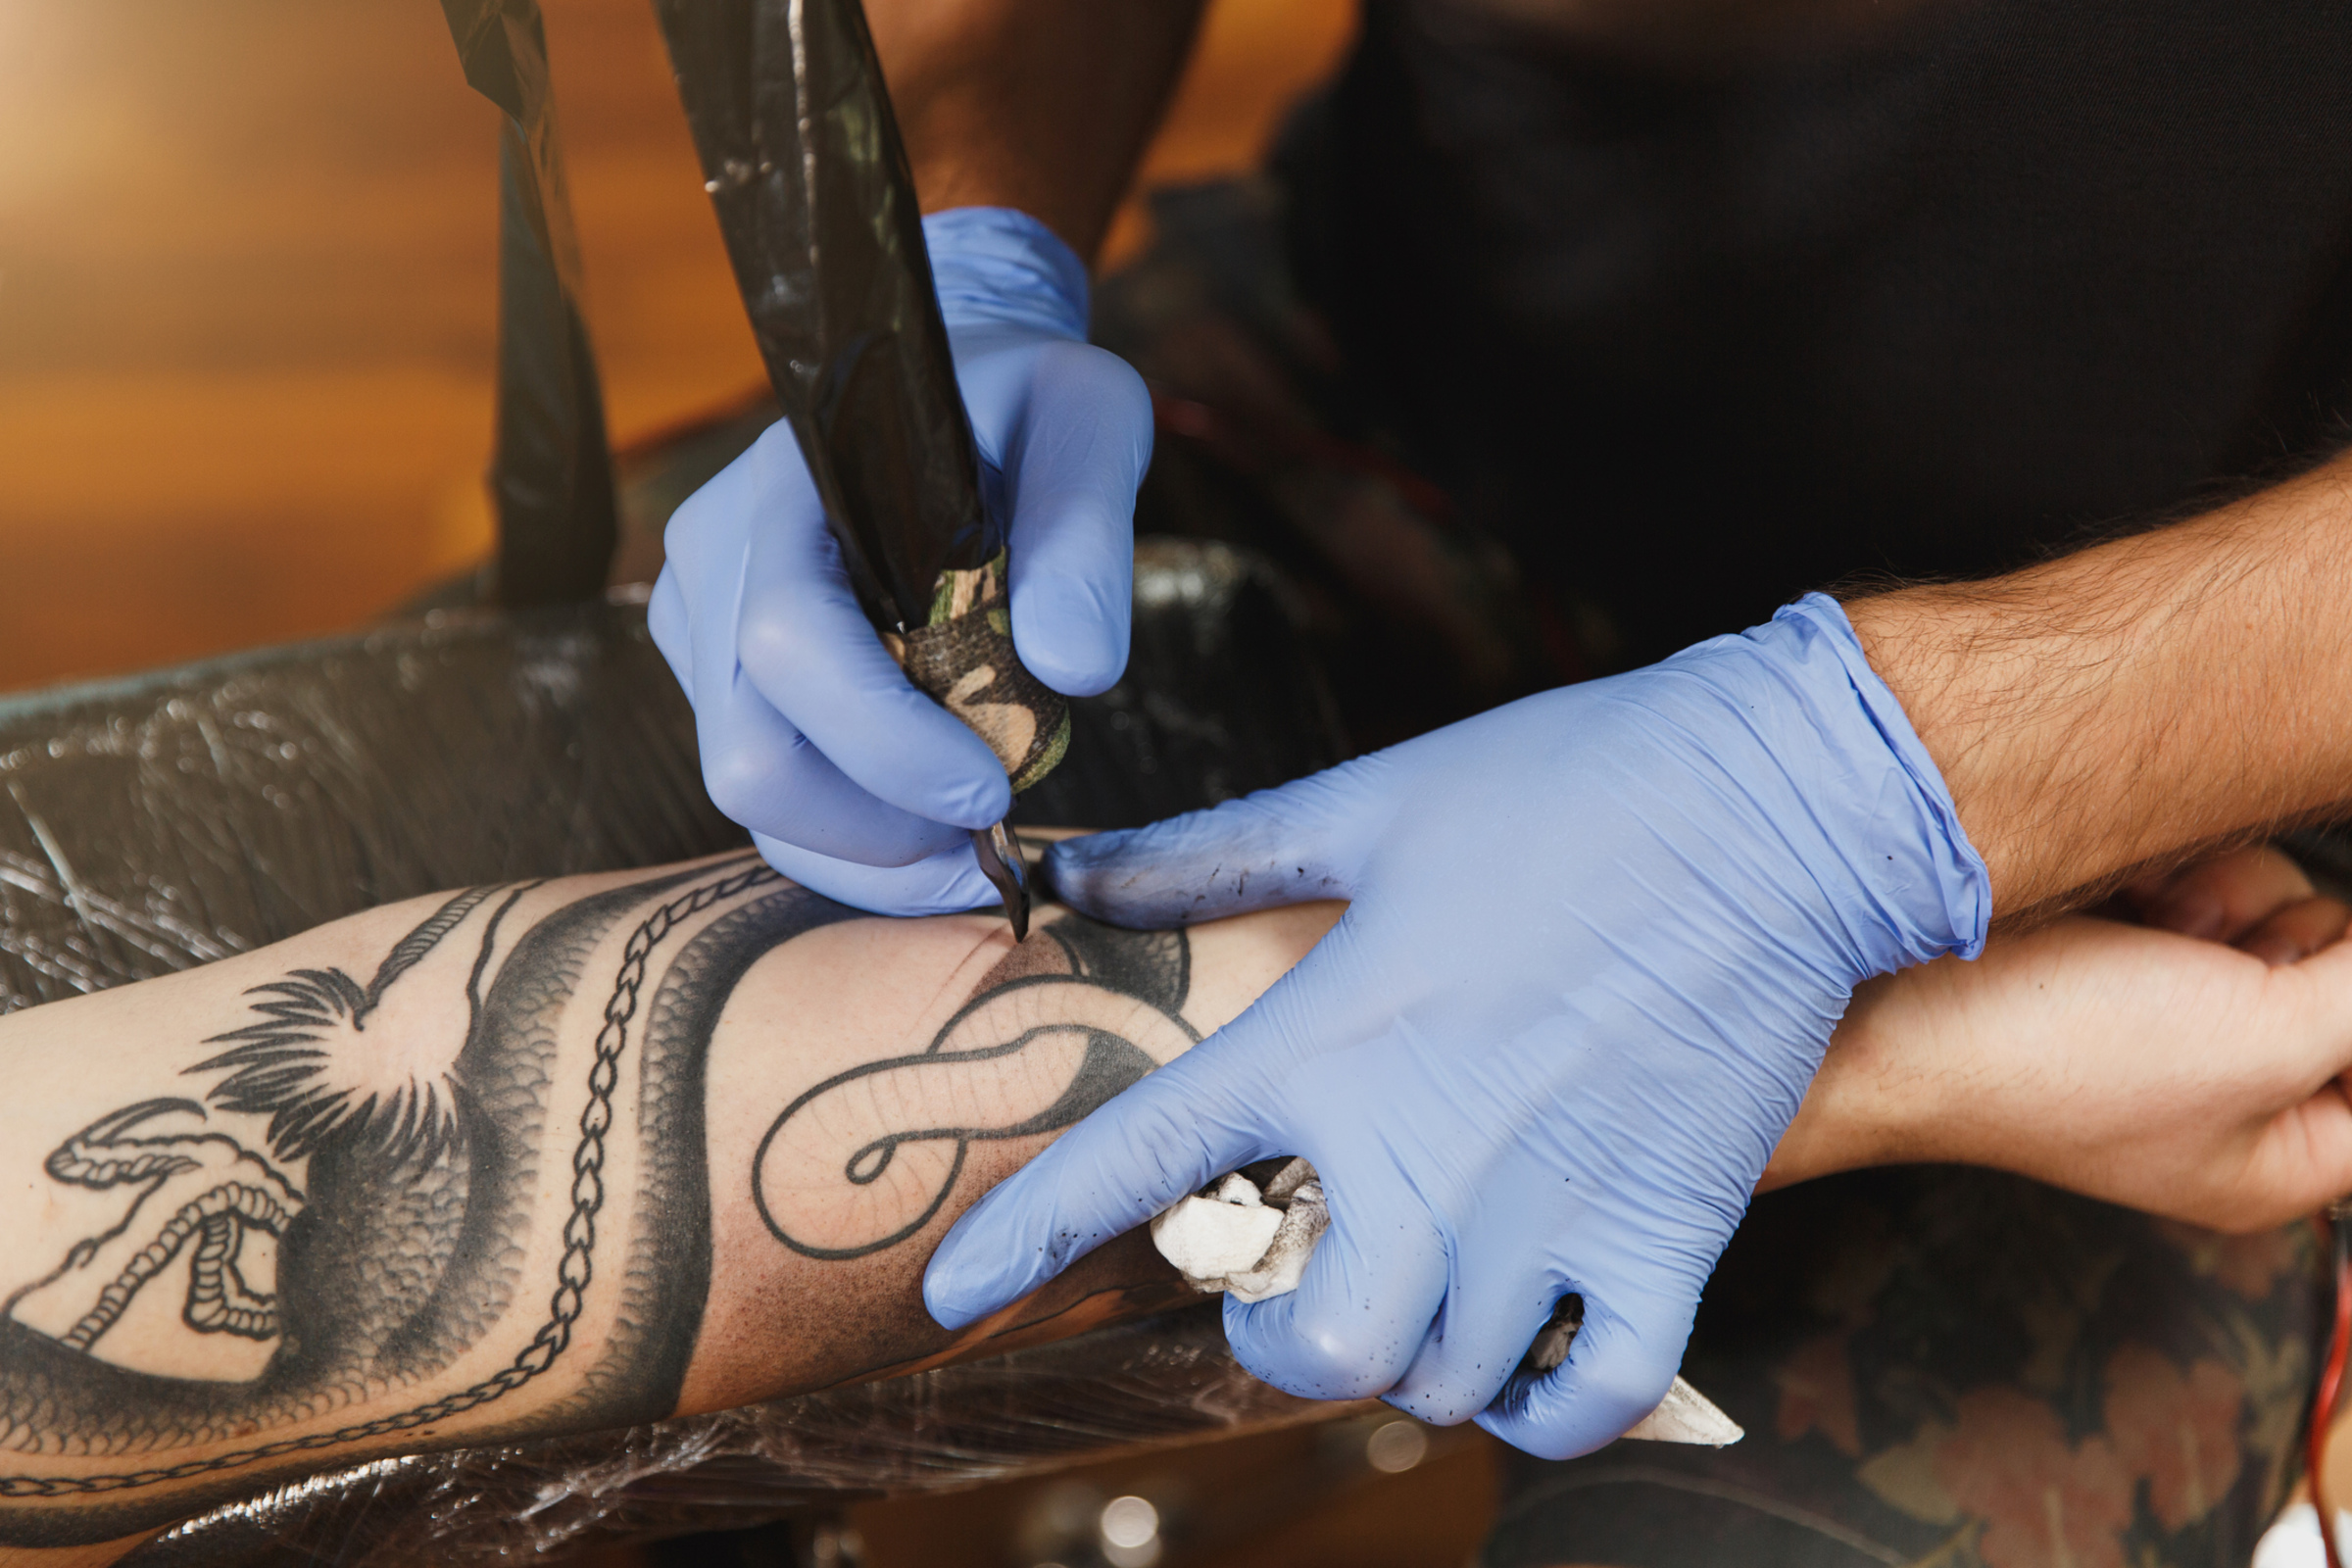 Tattoo artists need medical license Japanese court